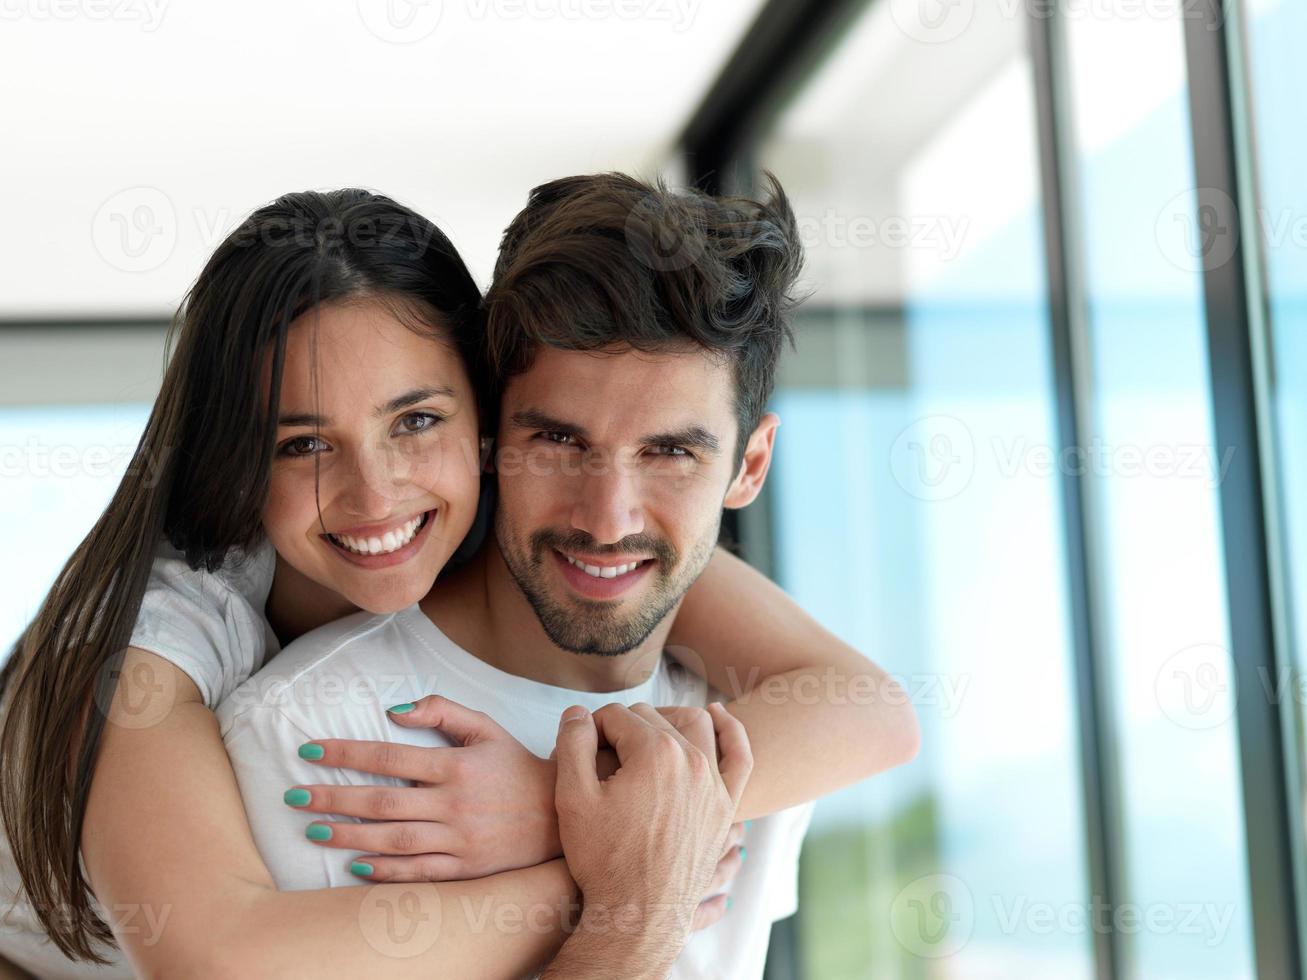 relaxed young couple at home photo